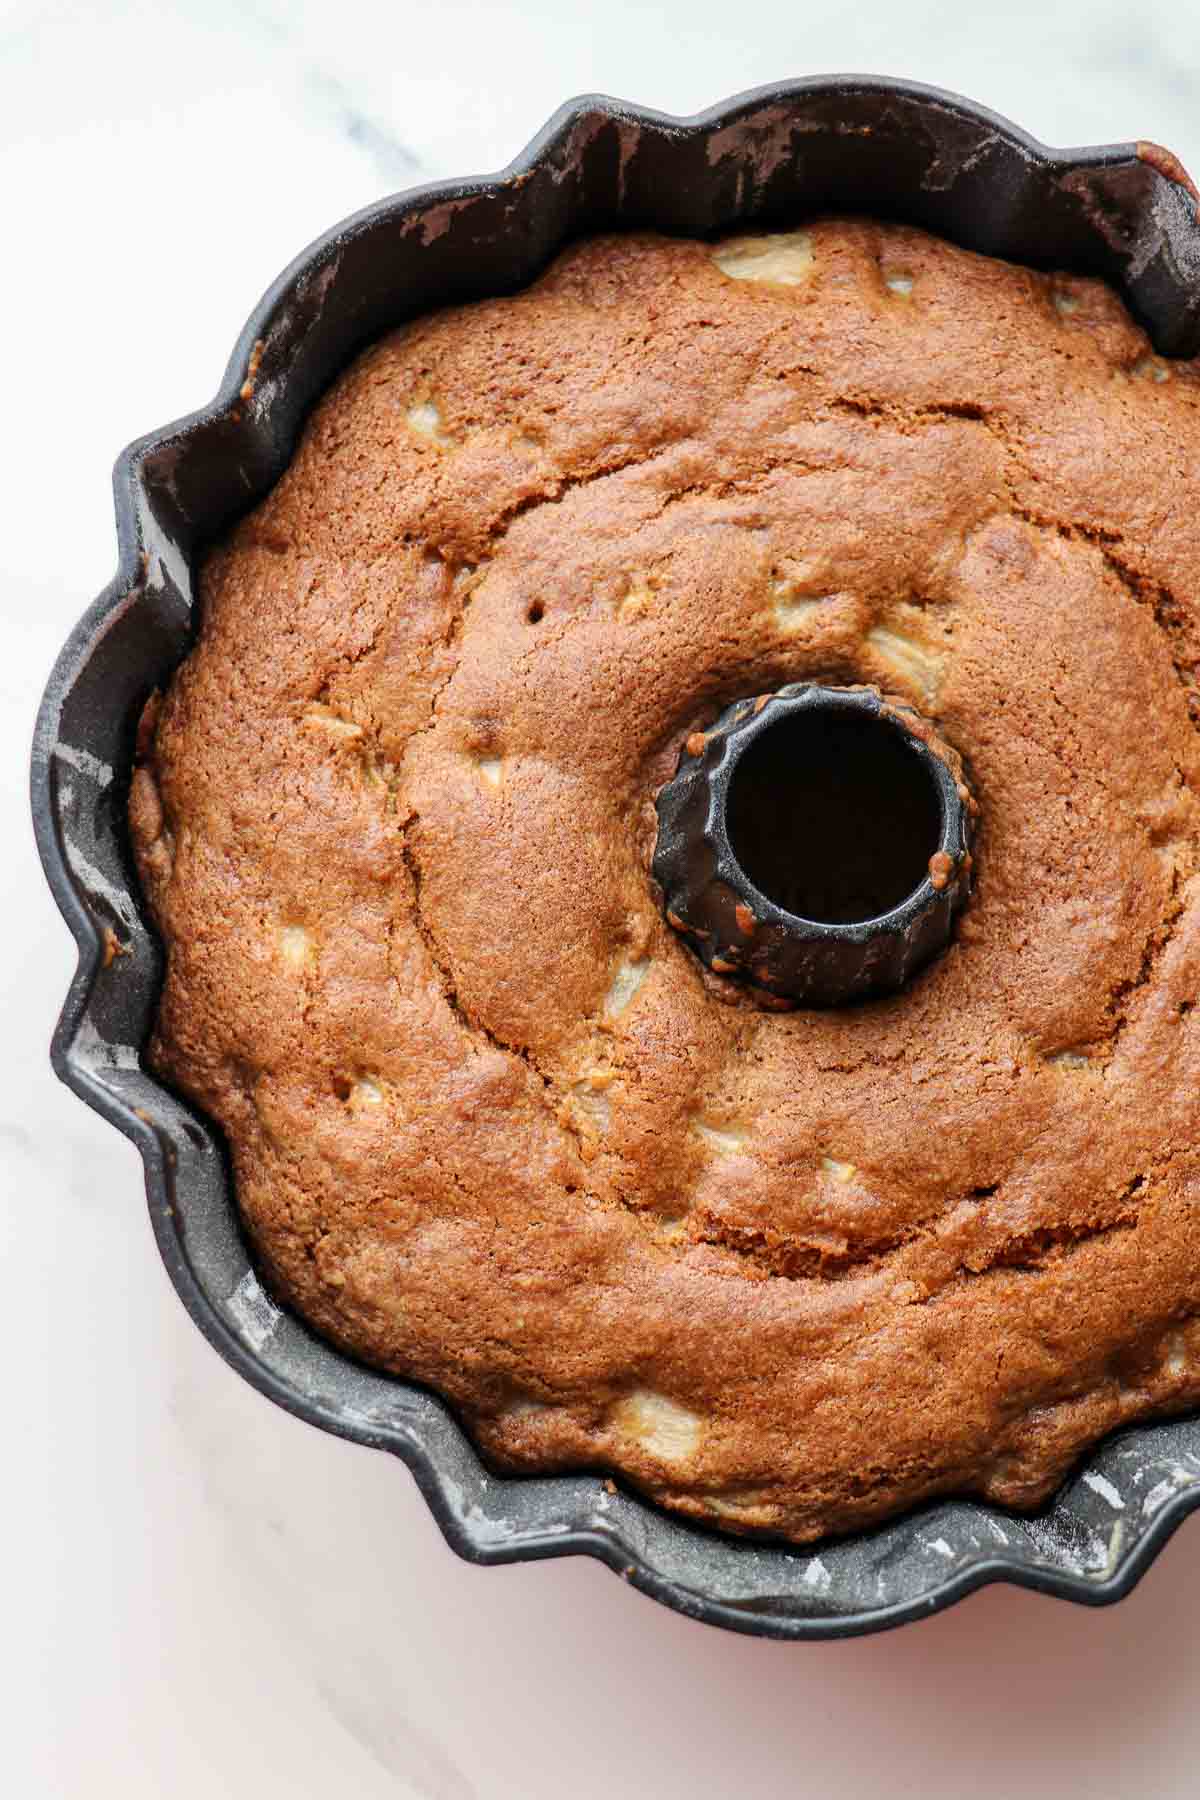 Baked Spiced Pear Cake with Cardamom in a bundt pan.